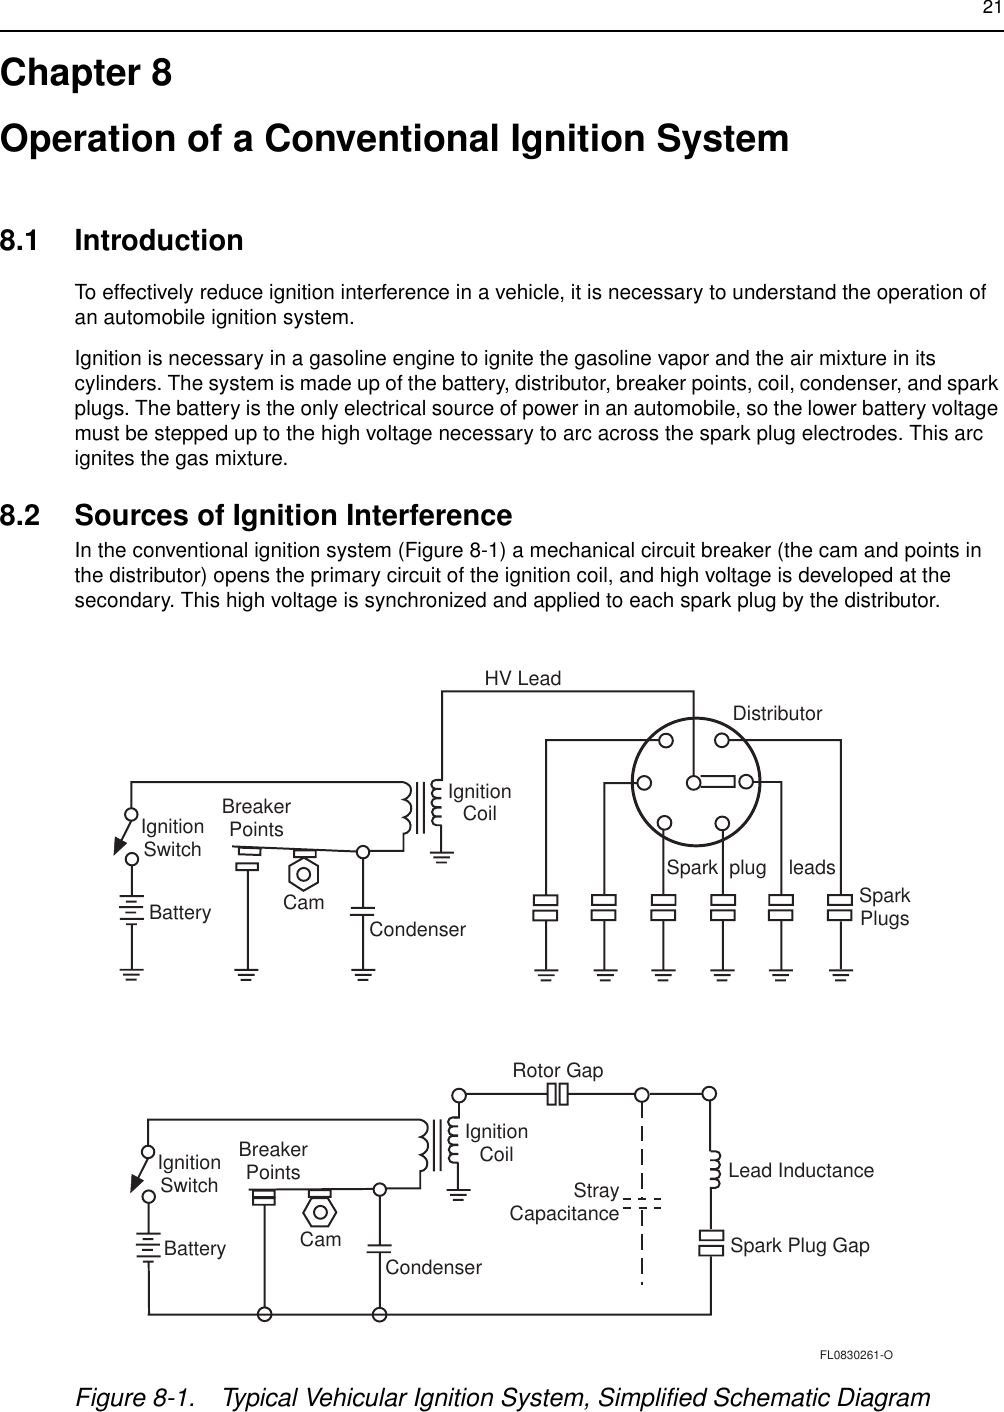 21Chapter 8Operation of a Conventional Ignition System8.1 IntroductionTo effectively reduce ignition interference in a vehicle, it is necessary to understand the operation of an automobile ignition system.Ignition is necessary in a gasoline engine to ignite the gasoline vapor and the air mixture in its cylinders. The system is made up of the battery, distributor, breaker points, coil, condenser, and spark plugs. The battery is the only electrical source of power in an automobile, so the lower battery voltage must be stepped up to the high voltage necessary to arc across the spark plug electrodes. This arc ignites the gas mixture.8.2 Sources of Ignition Interference In the conventional ignition system (Figure 8-1) a mechanical circuit breaker (the cam and points in the distributor) opens the primary circuit of the ignition coil, and high voltage is developed at the secondary. This high voltage is synchronized and applied to each spark plug by the distributor.Figure 8-1. Typical Vehicular Ignition System, Simplified Schematic Diagram HV LeadDistributorSpark  plug    leadsSparkPlugsIgnitionCoilCondenserCamBreakerPointsIgnitionSwitchBatteryIgnitionCoilCondenserStrayCapacitanceCamBreakerPointsIgnitionSwitchBatteryRotor GapLead InductanceSpark Plug GapFL0830261-O